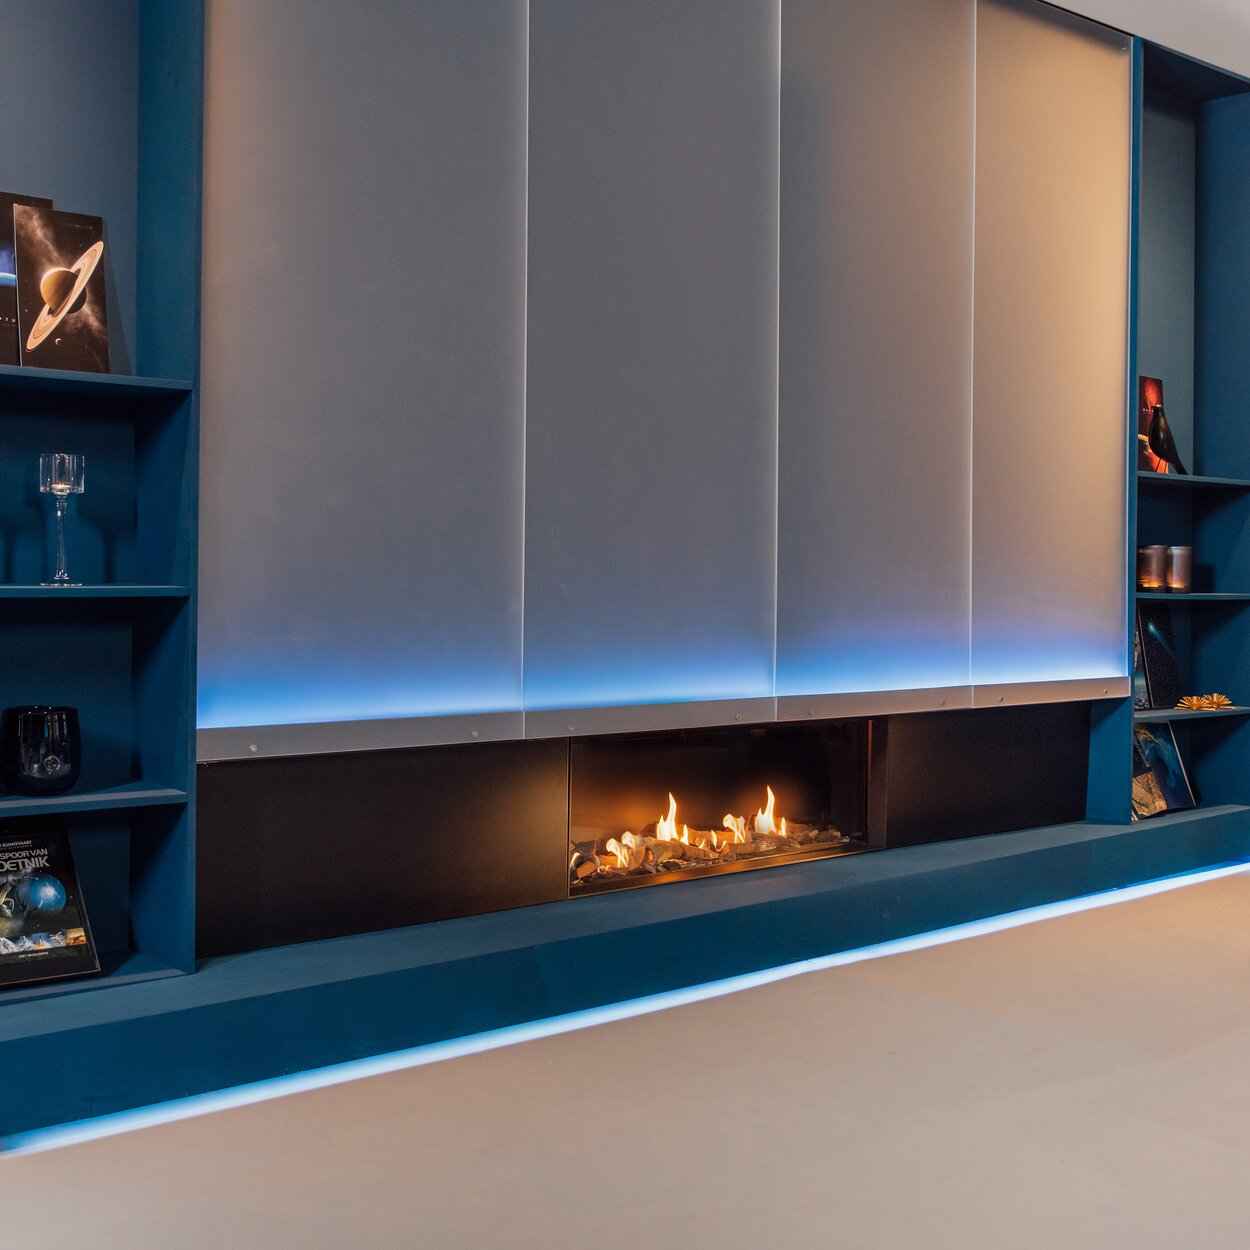 MatriX Linear 1300/400 front gas fireplace installed in the blue sideboard in the living room